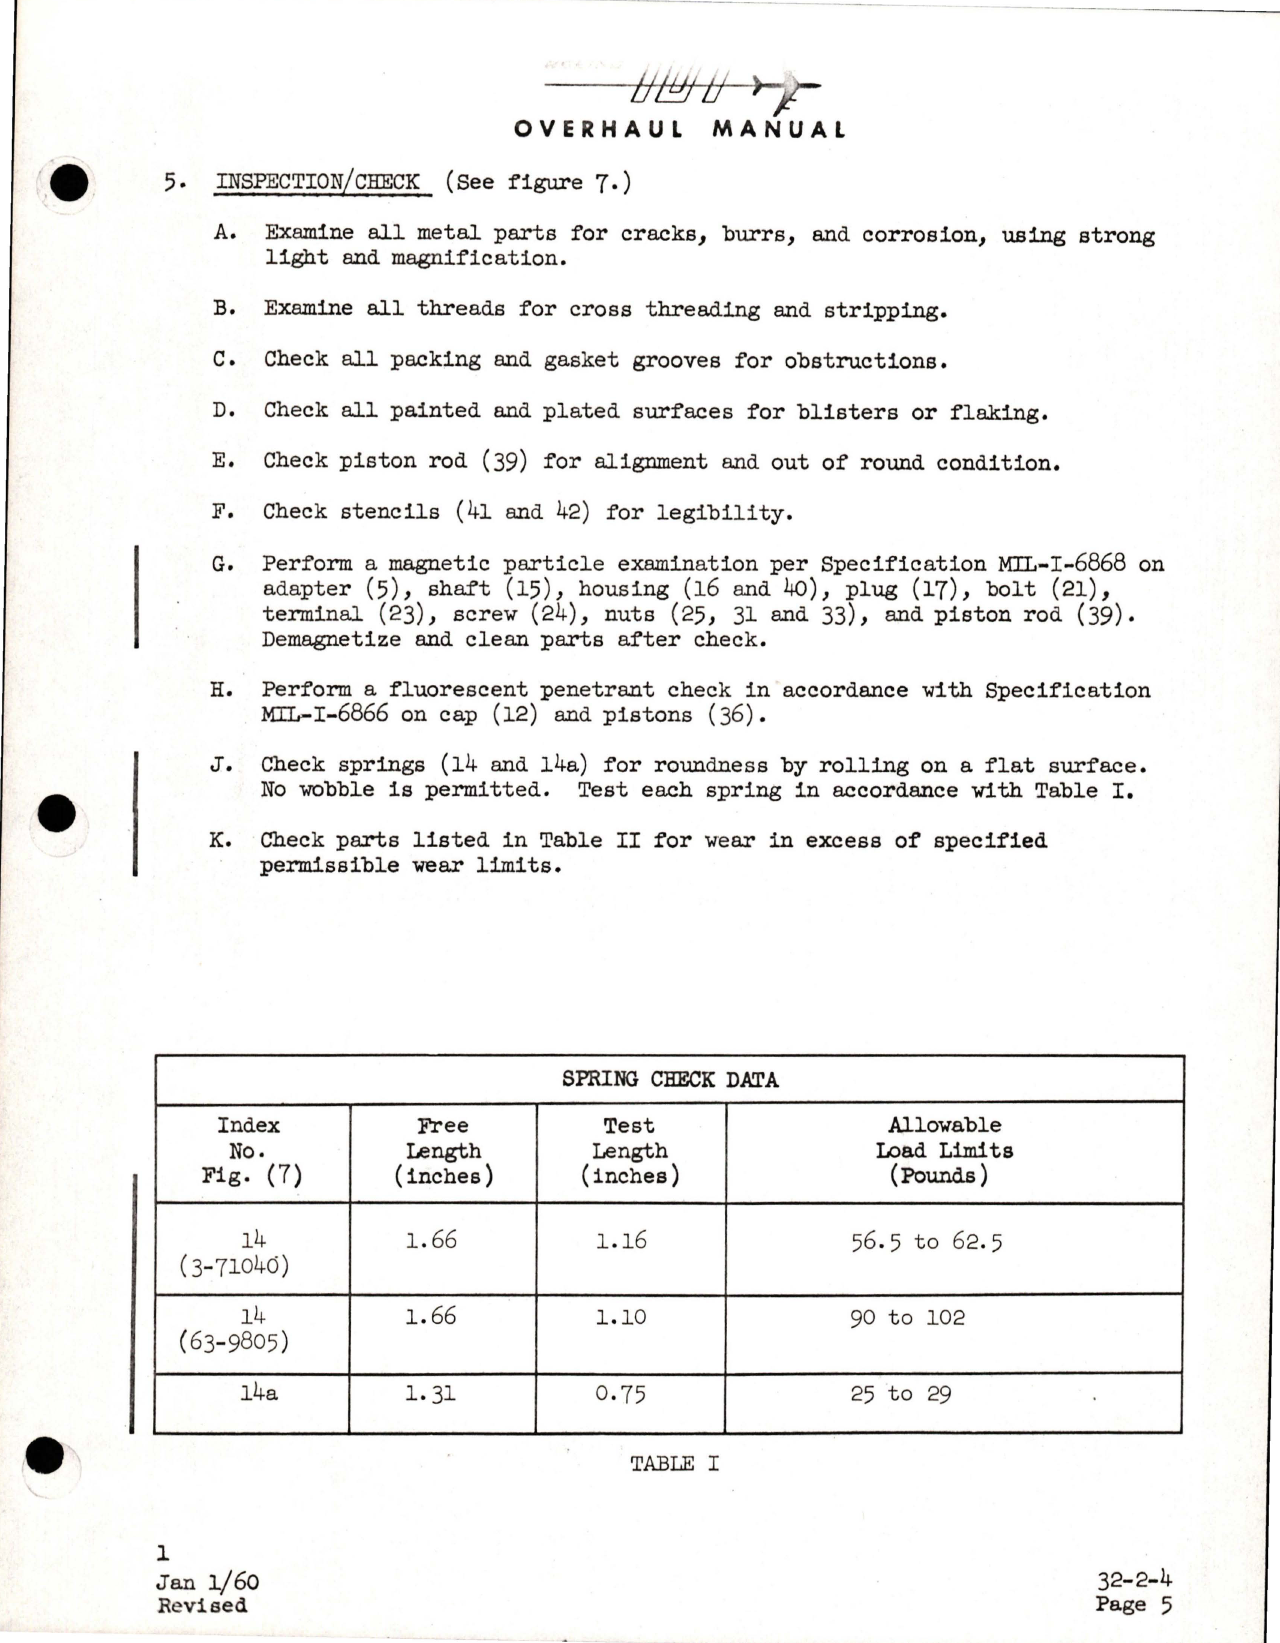 Sample page 5 from AirCorps Library document: Overhaul Manual for Main Gear Centering Cylinder Assembly